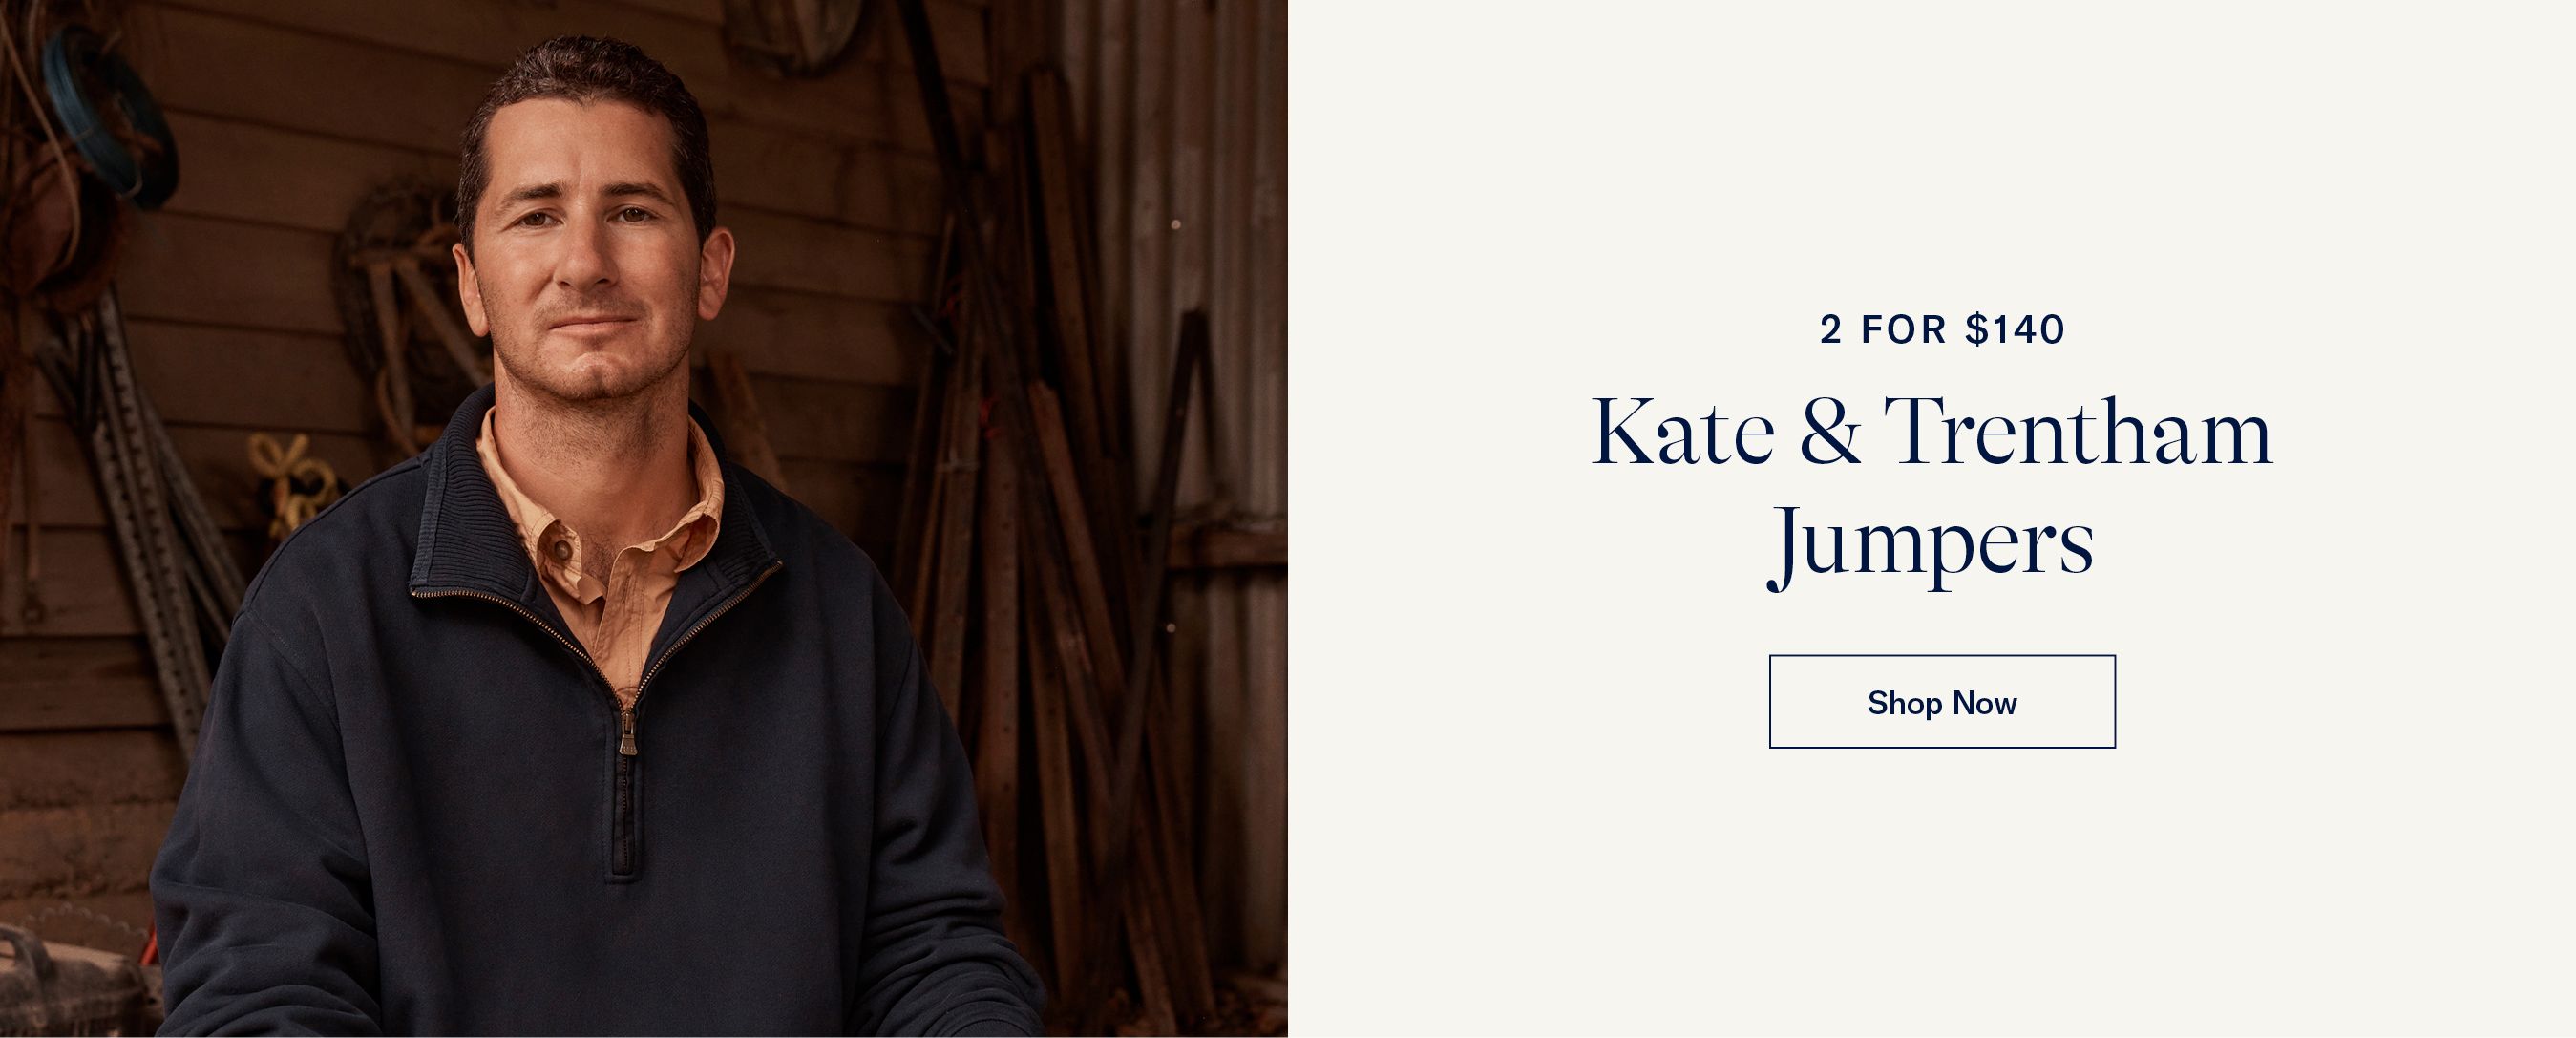 Kate & Trentham Jumpers